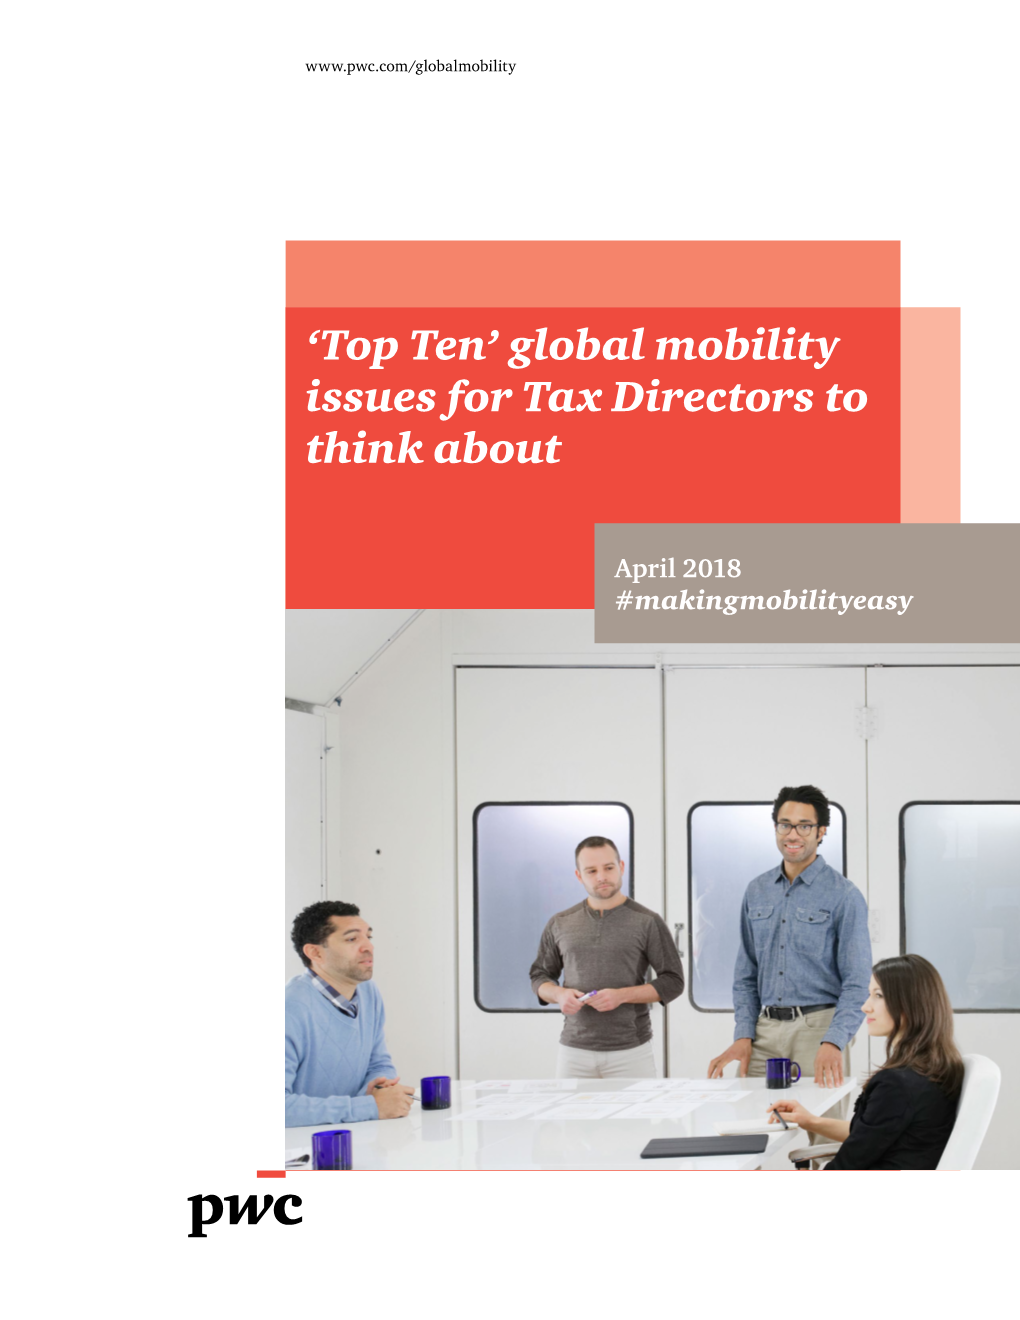 "Top Ten" Global Mobility Issues for Tax Directors to Think About